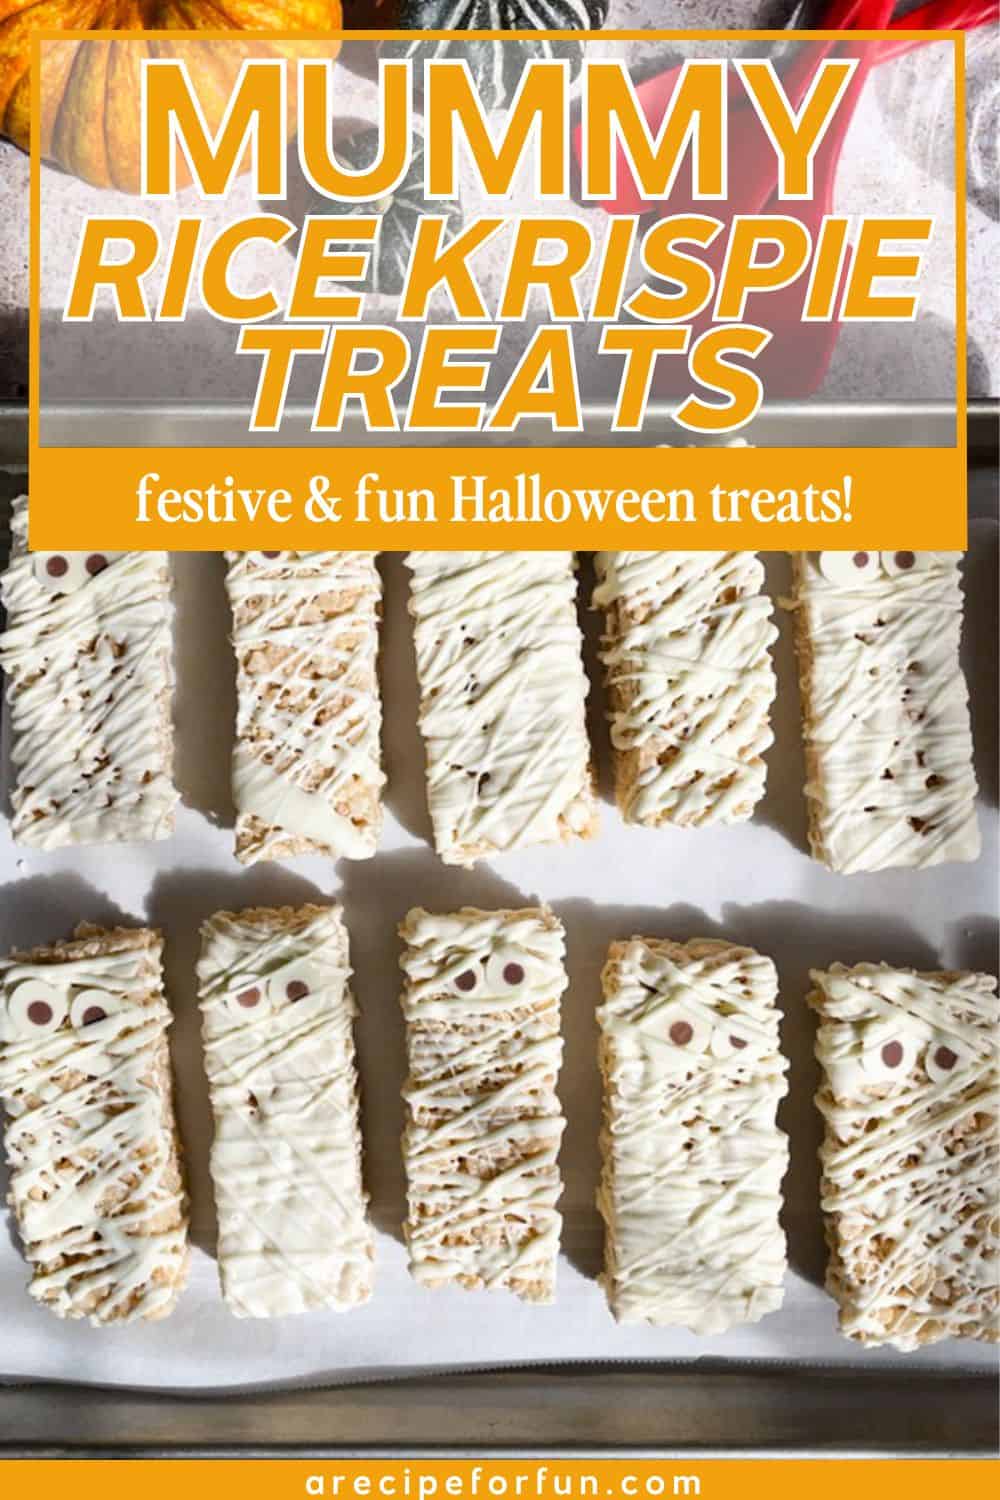 Pinterest Pin for a post about a recipe for mummy rice krispie treats.